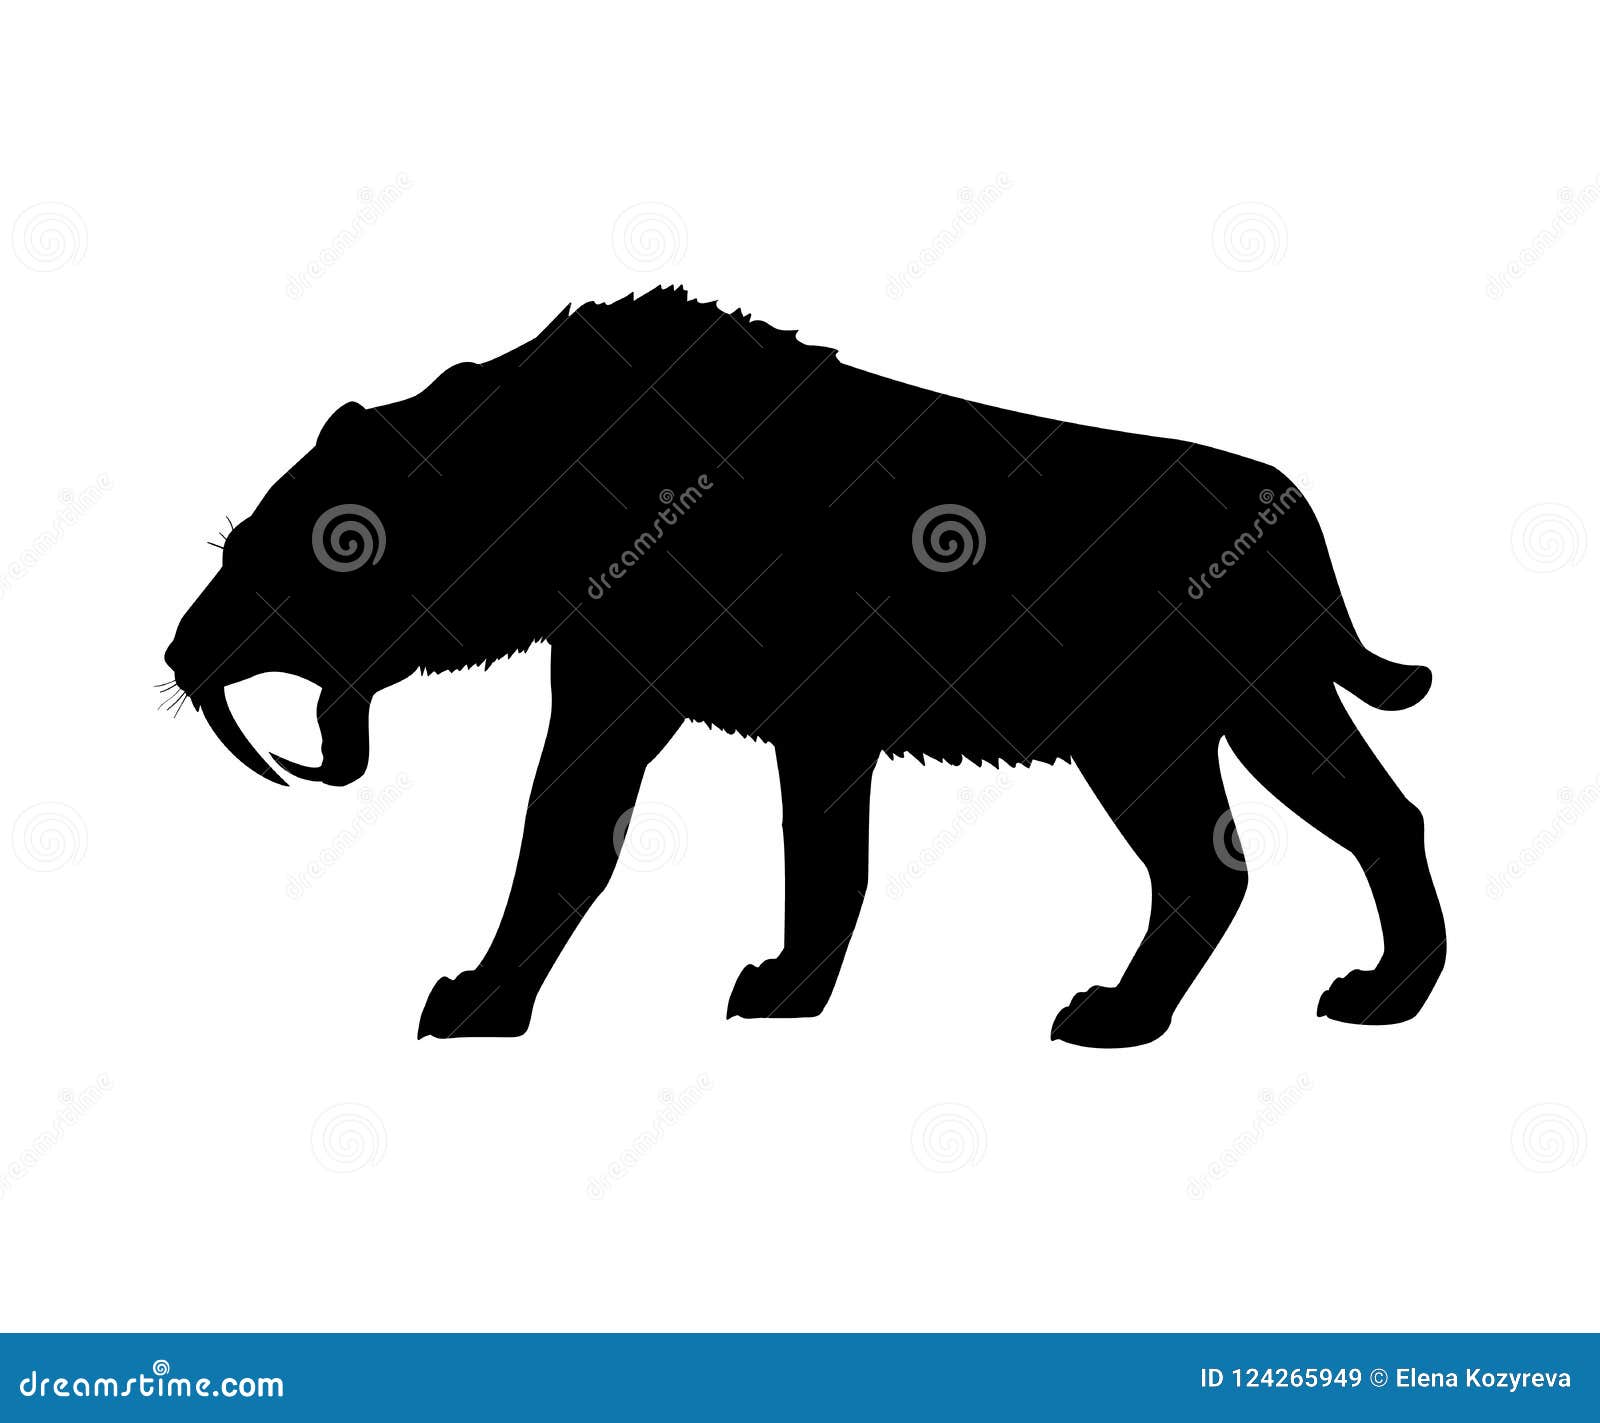 saber toothed tiger silhouette extinct mammalian animal